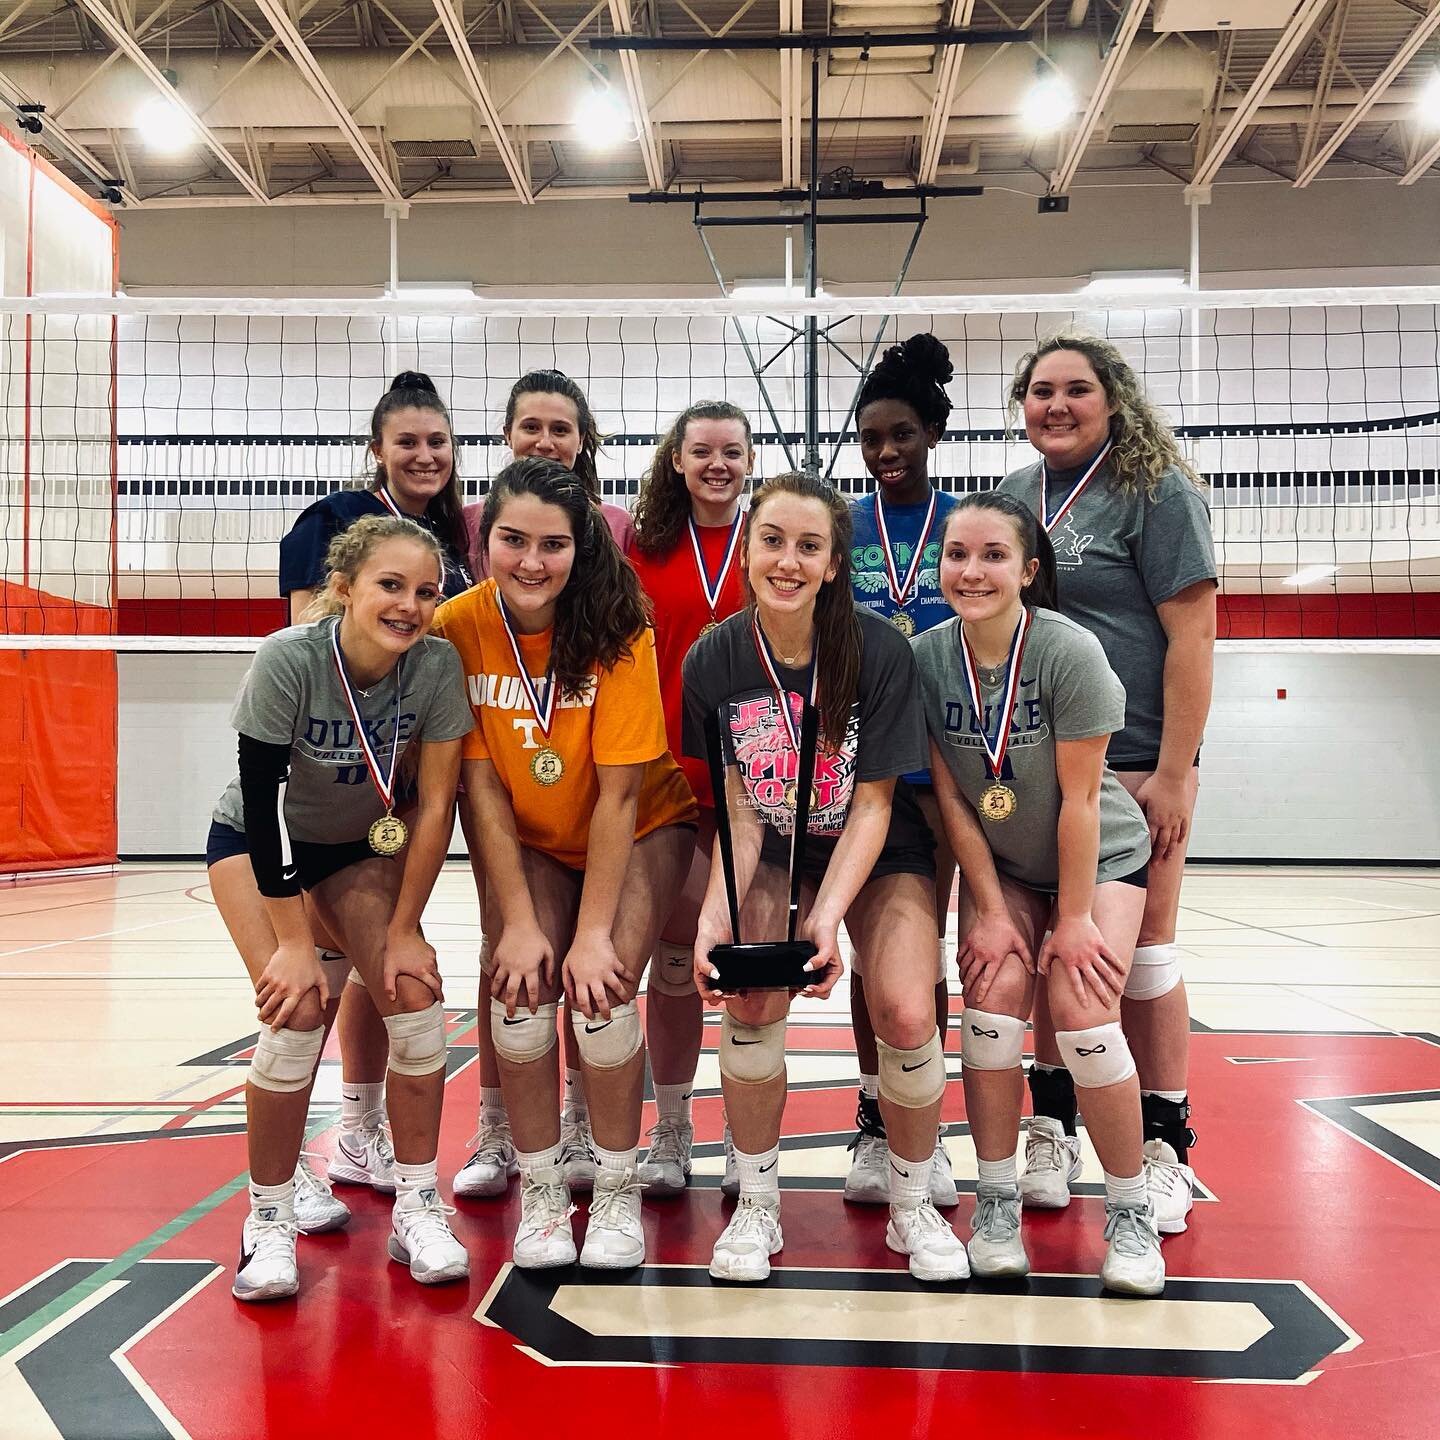 18 Red got their medals for first place in Gold at Volley by the James 🥇 Congratulations ladies! #volleyball #volleyballplayer #roanokeunited